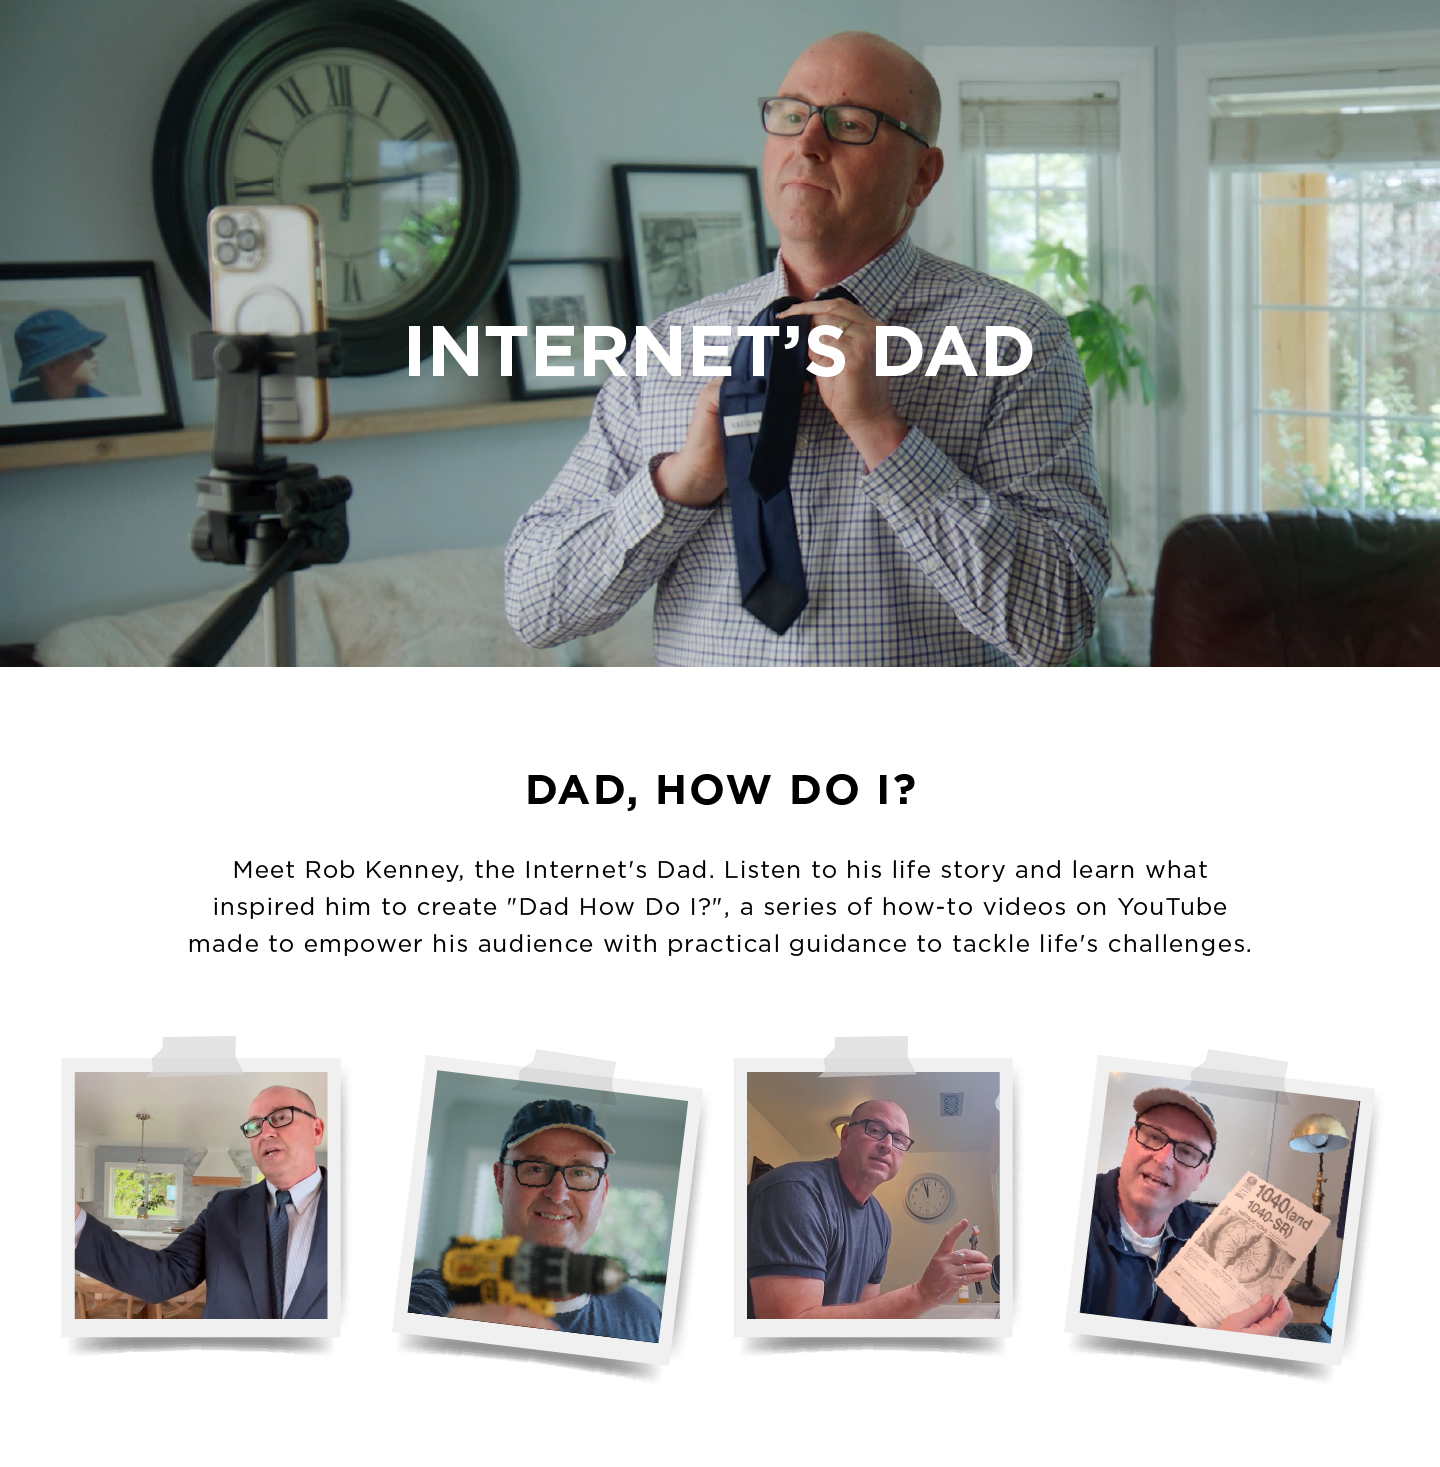 The Internet's Dad